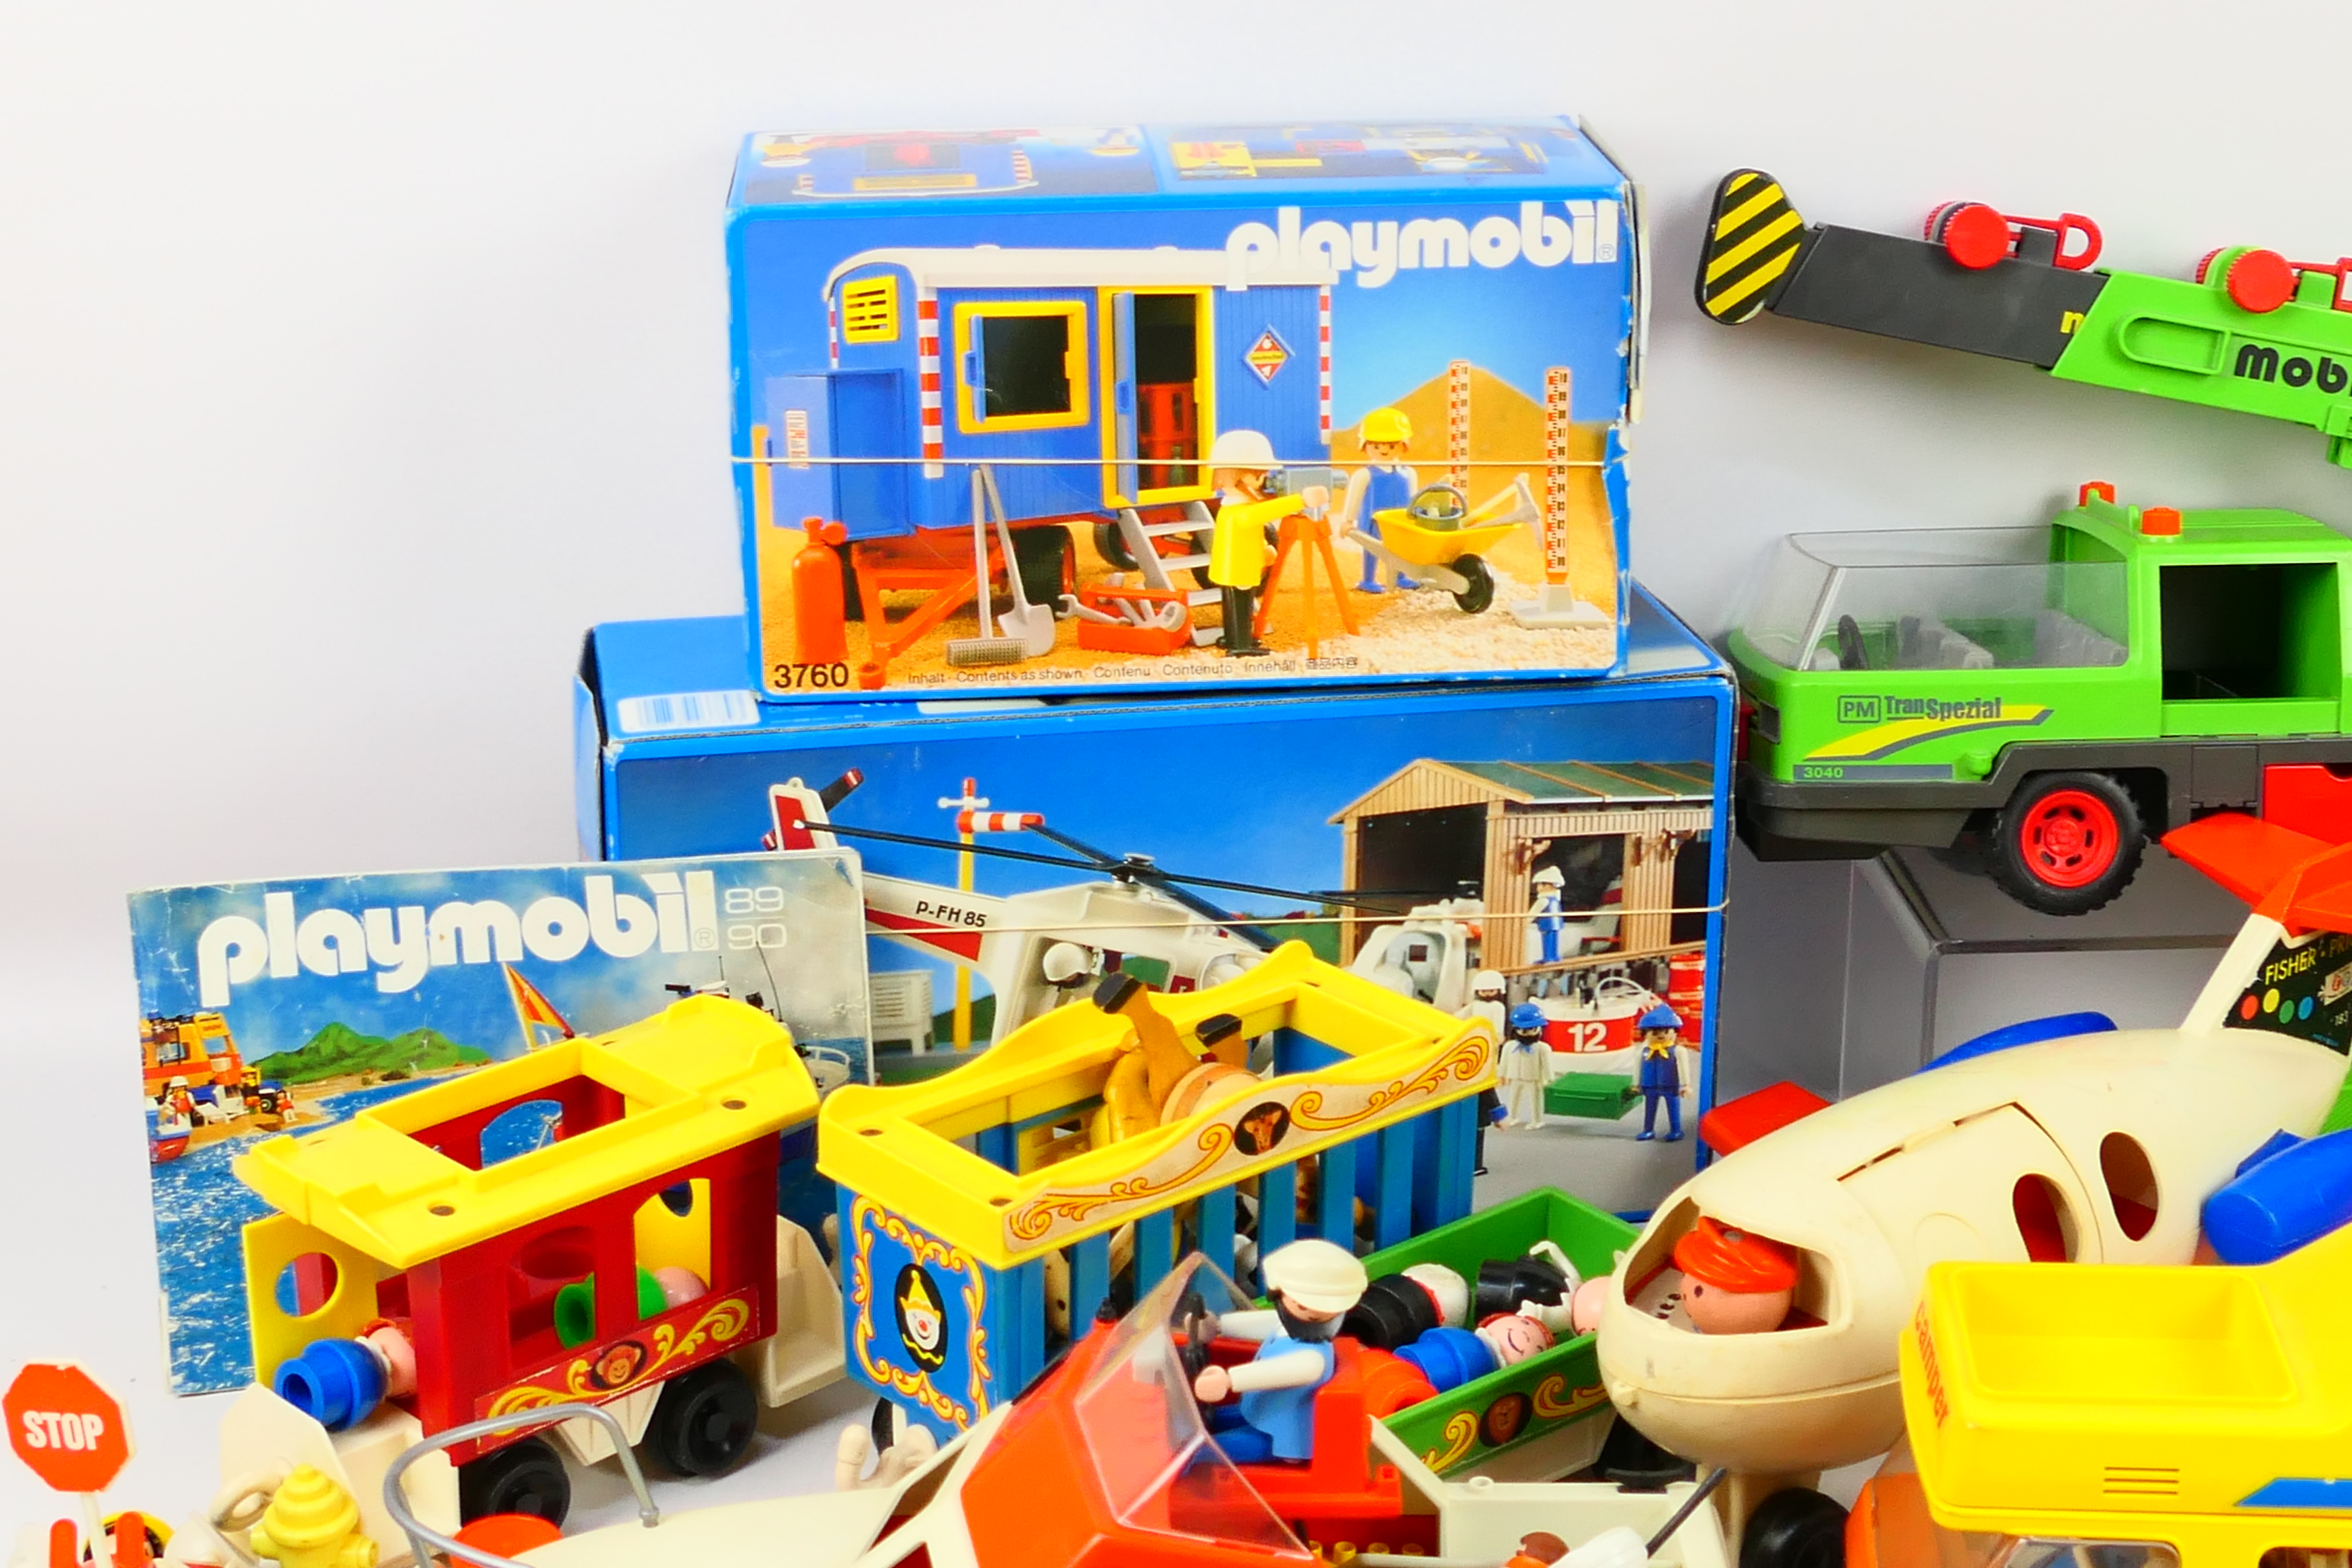 Fisher Price - Playmobil - A collection of vintage Fisher Price toys and 2 x boxed Playmobil sets, - Image 2 of 5